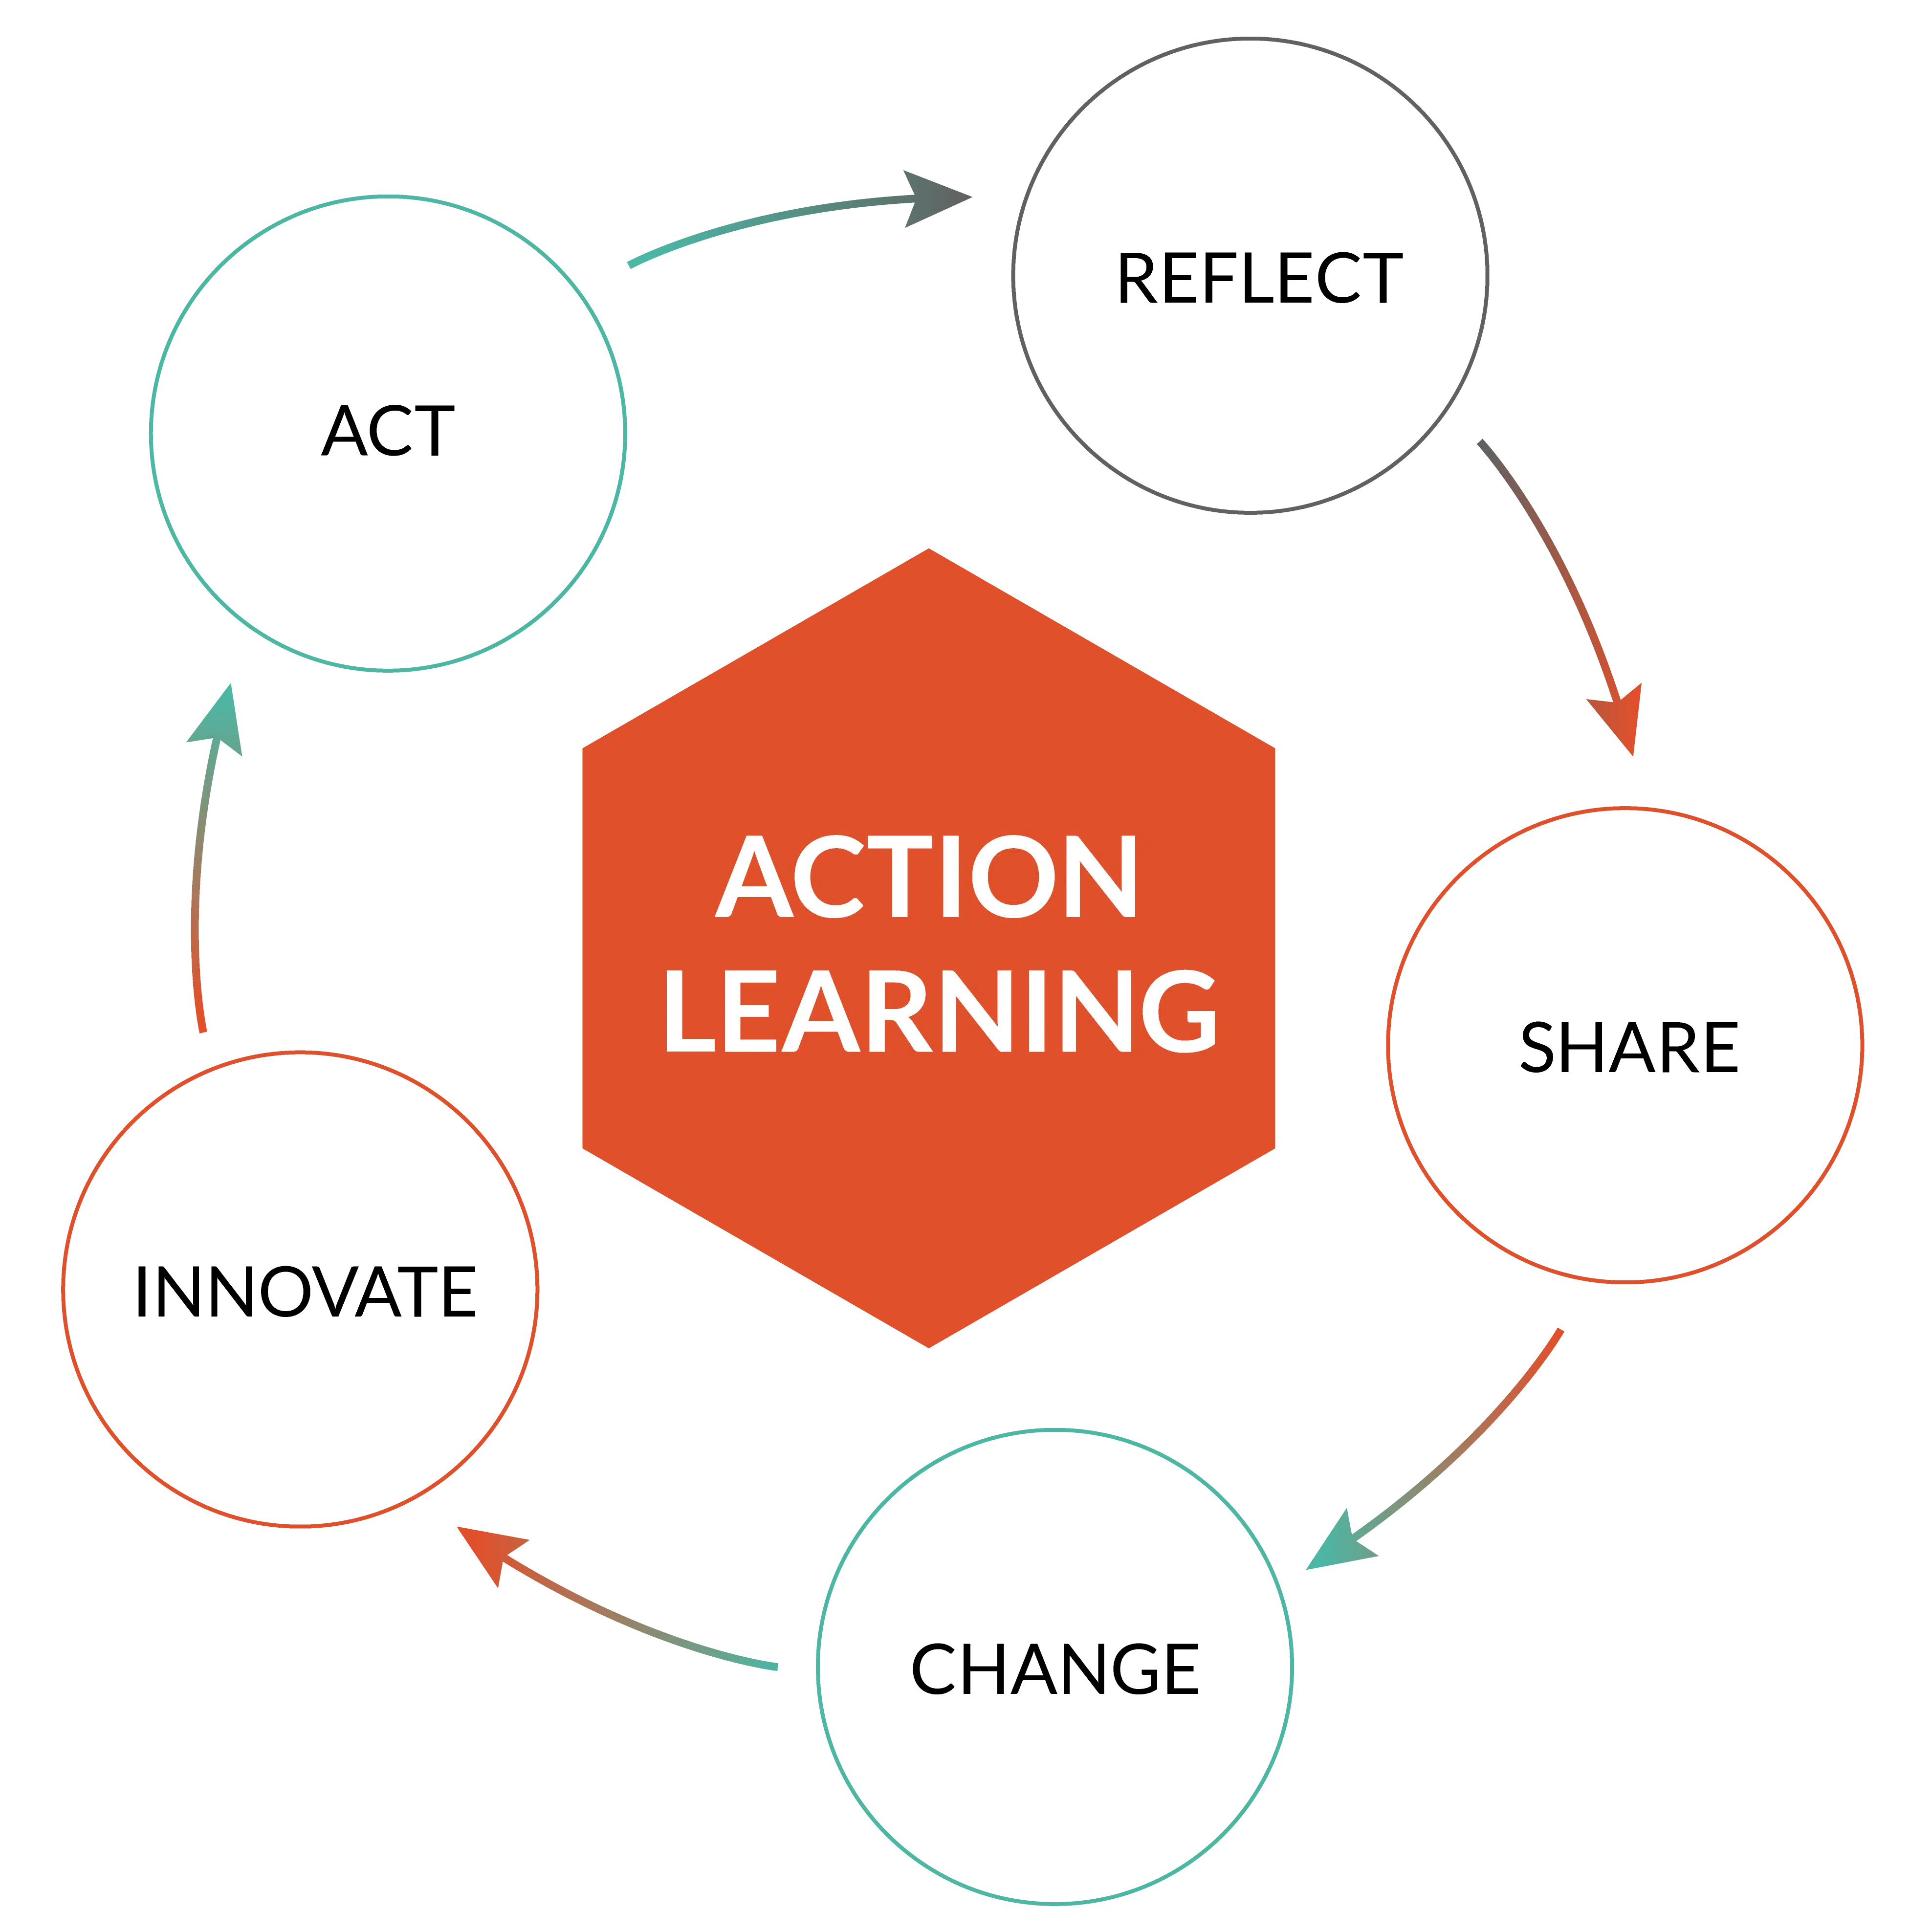 Action learning : reflect, share, change, innovate, act